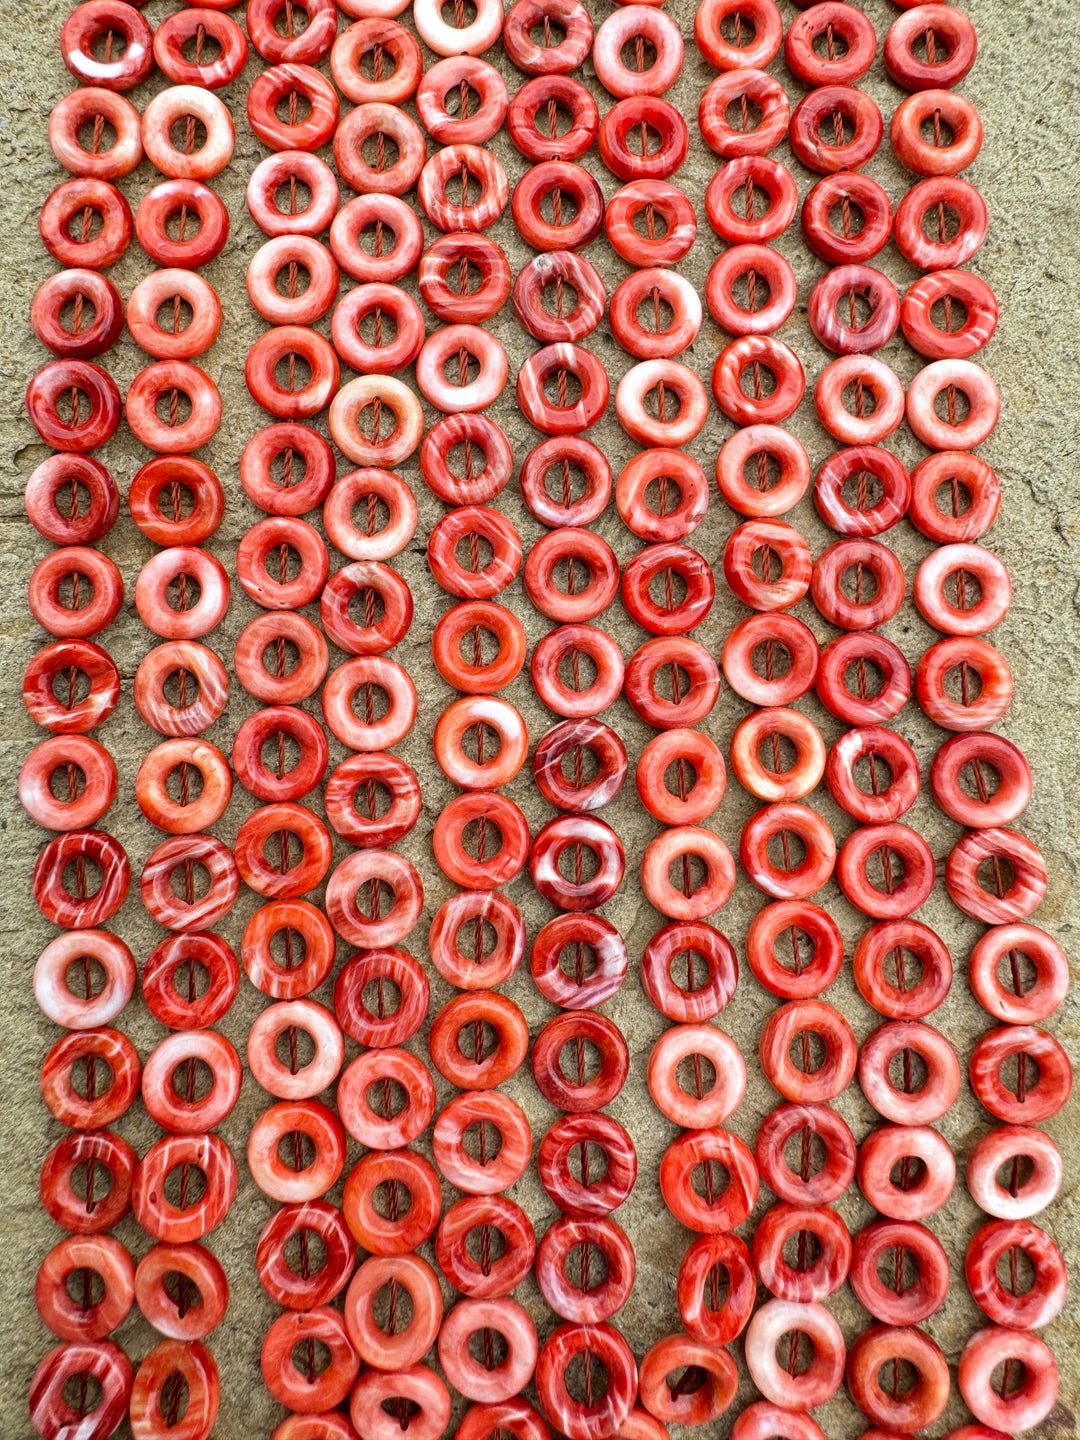 Red/Rust Spiny Oyster 10mm Donut Beads (16 Inch Strand)